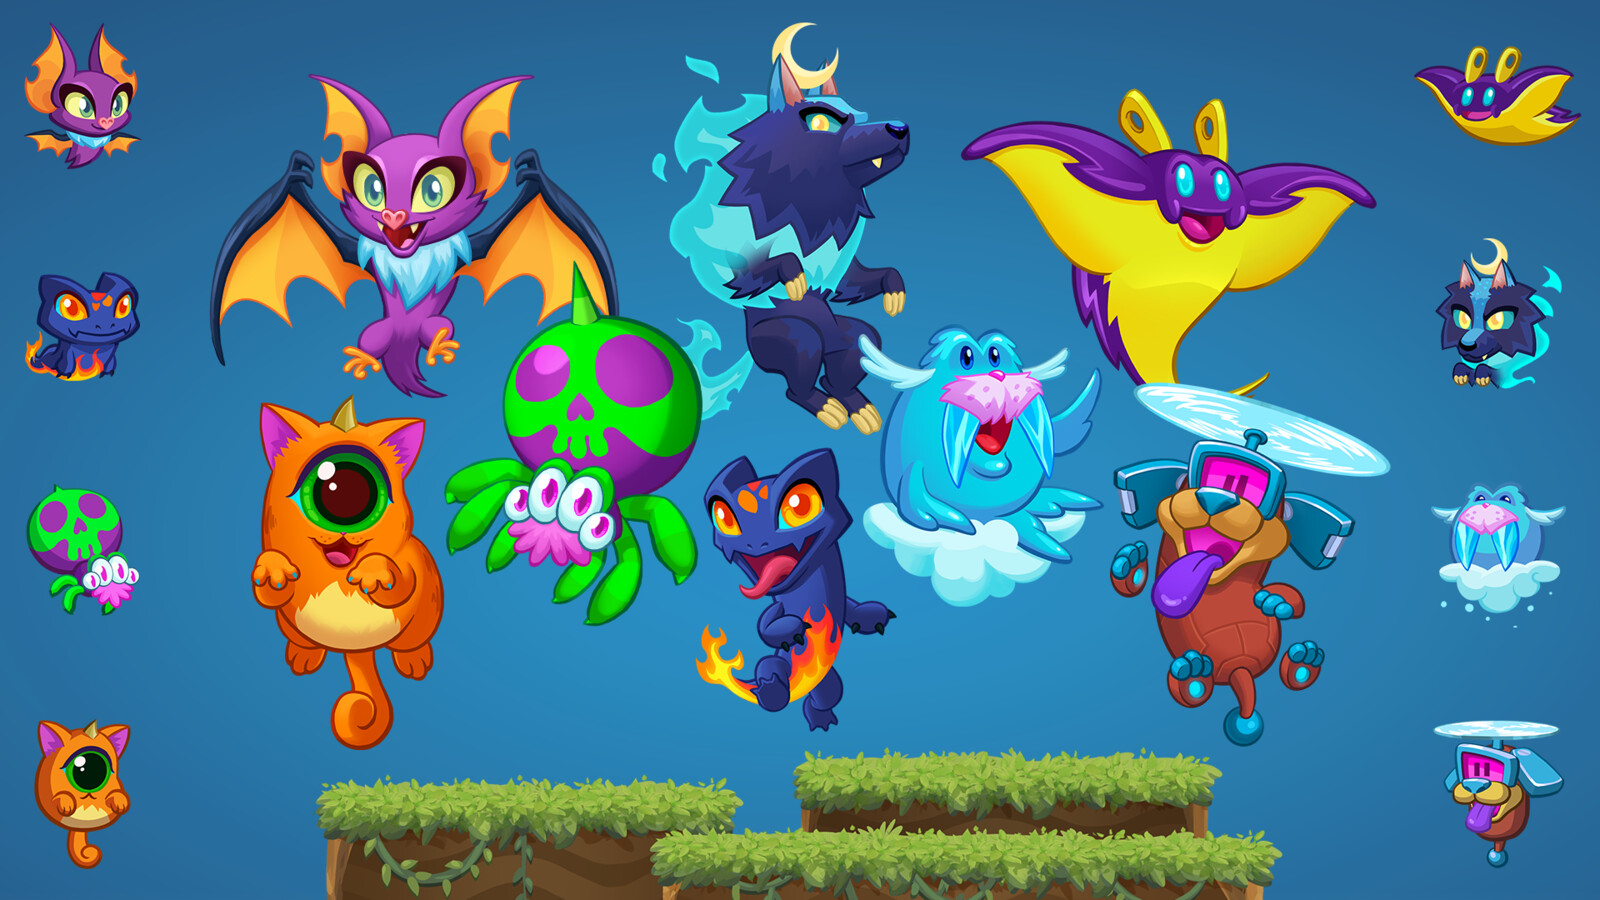 The 8 pets I created for Mr Autofire, Starlet, Celeste, Zappy, Noodle, Pickles, Bean, Lizzie and Woofie, in both their small gameplay versions and the detailed loadout full glory.